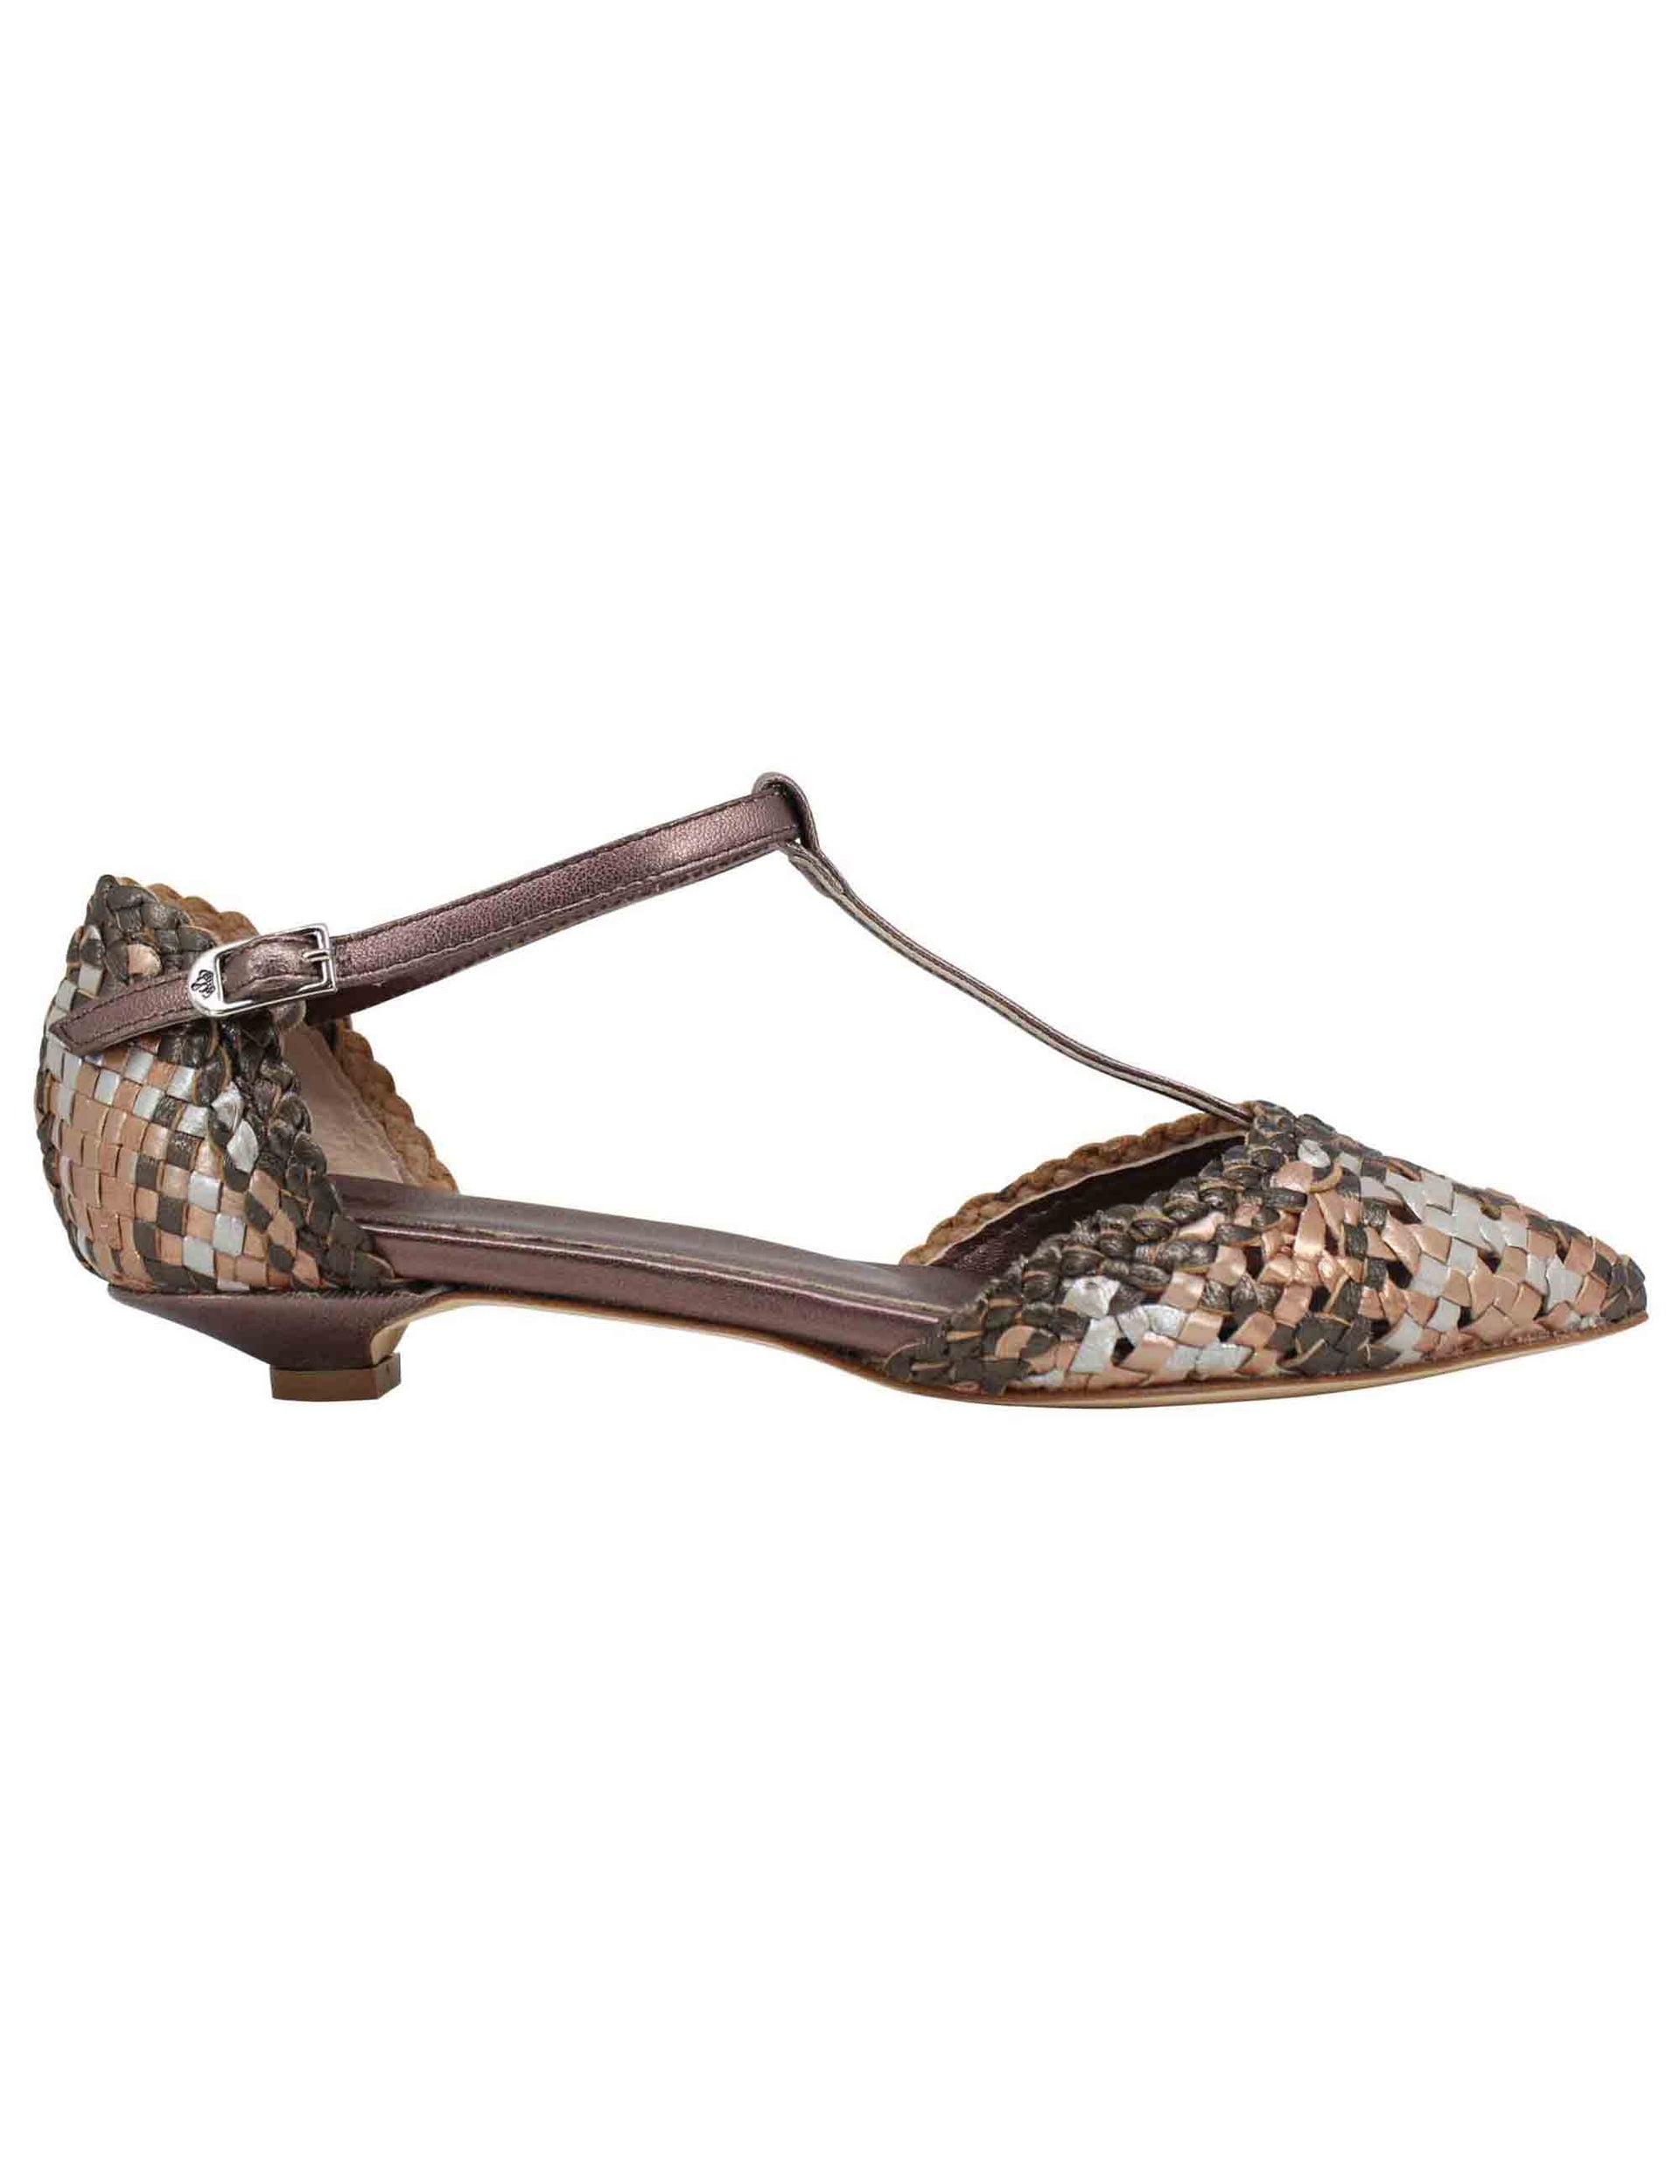 Women's decollete in taupe woven leather with low heel